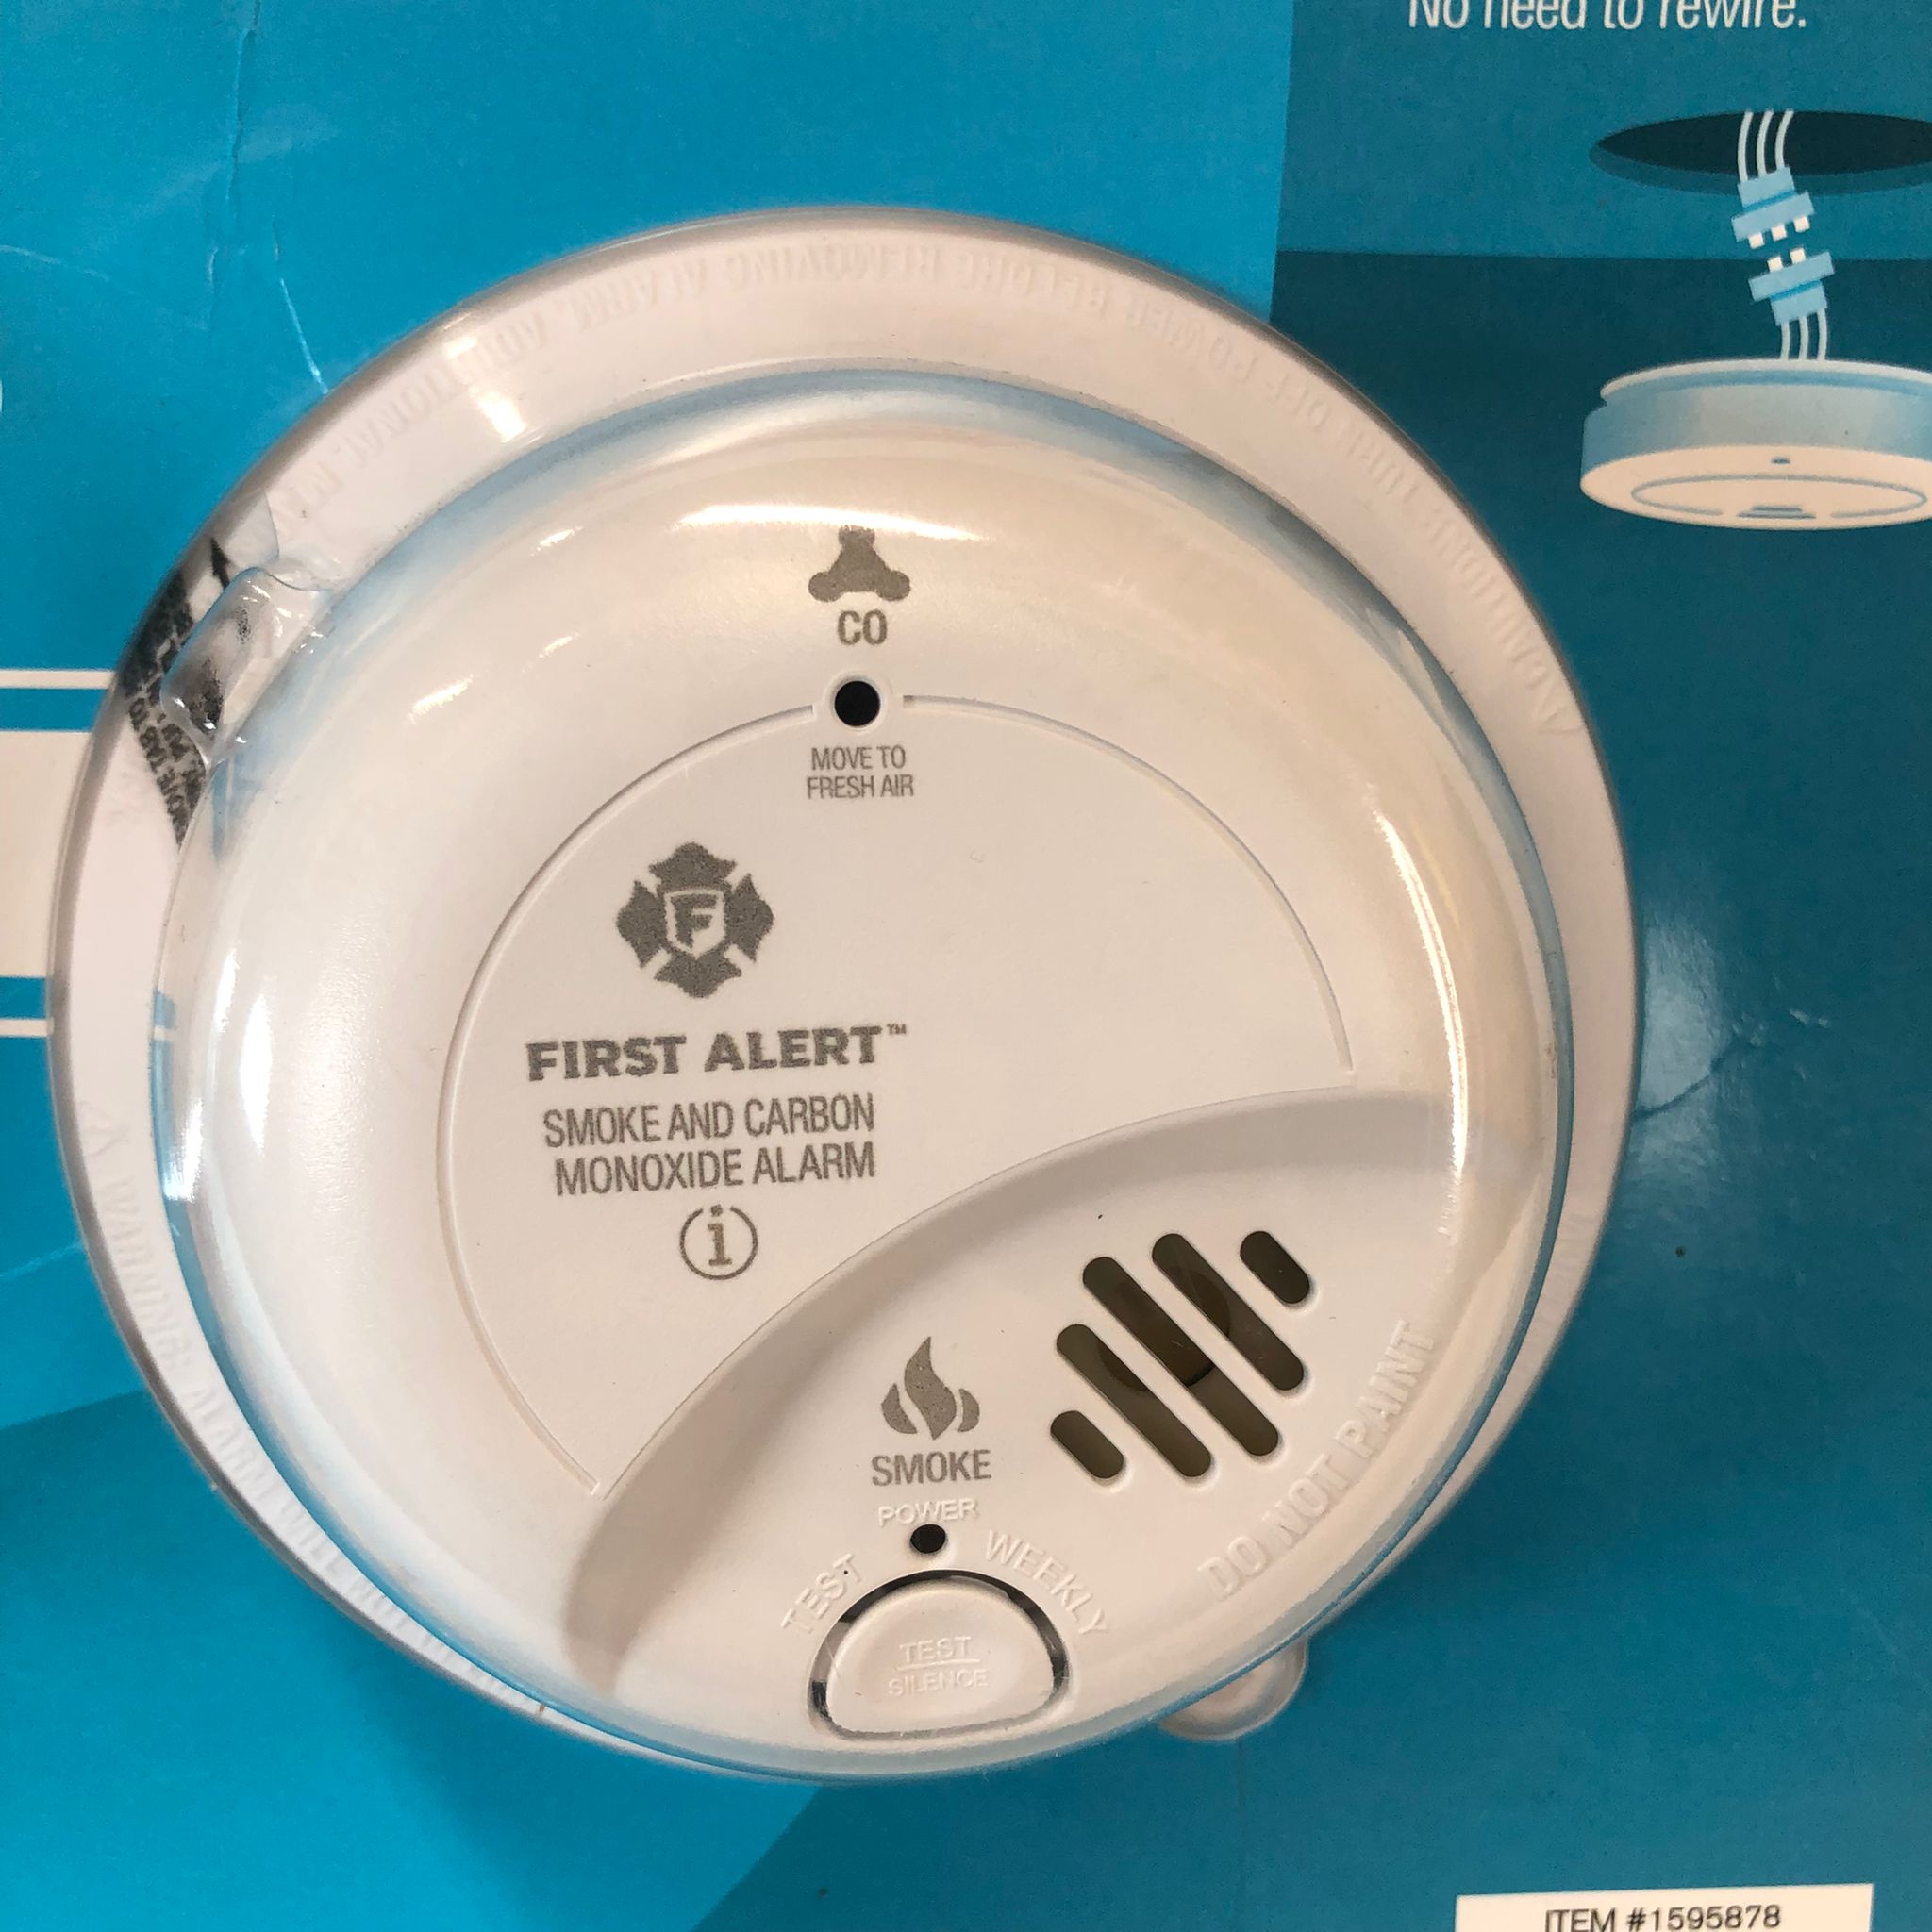 First Alert 2-Pack Smoke & CO Alarms with Battery Backup & Quick Connect